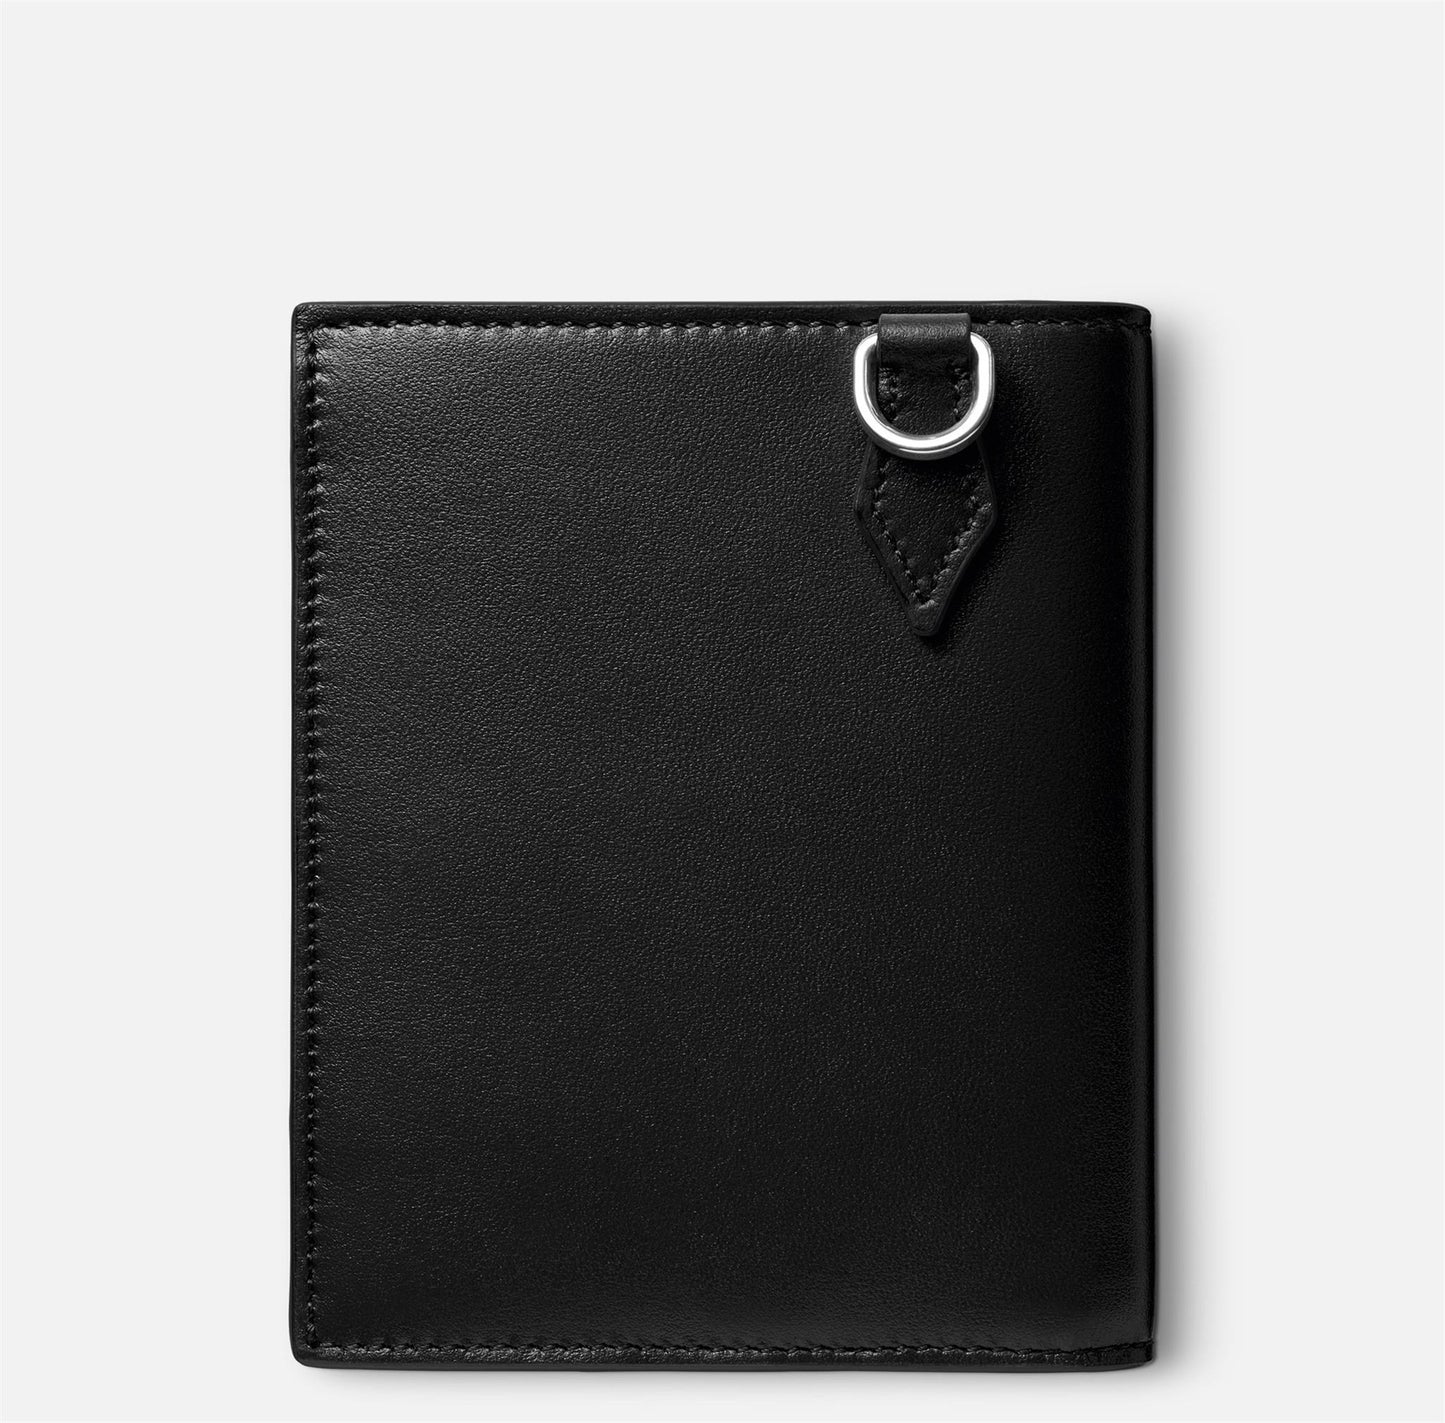 Montblanc Meisterstock Black Compact Wallet 6cc